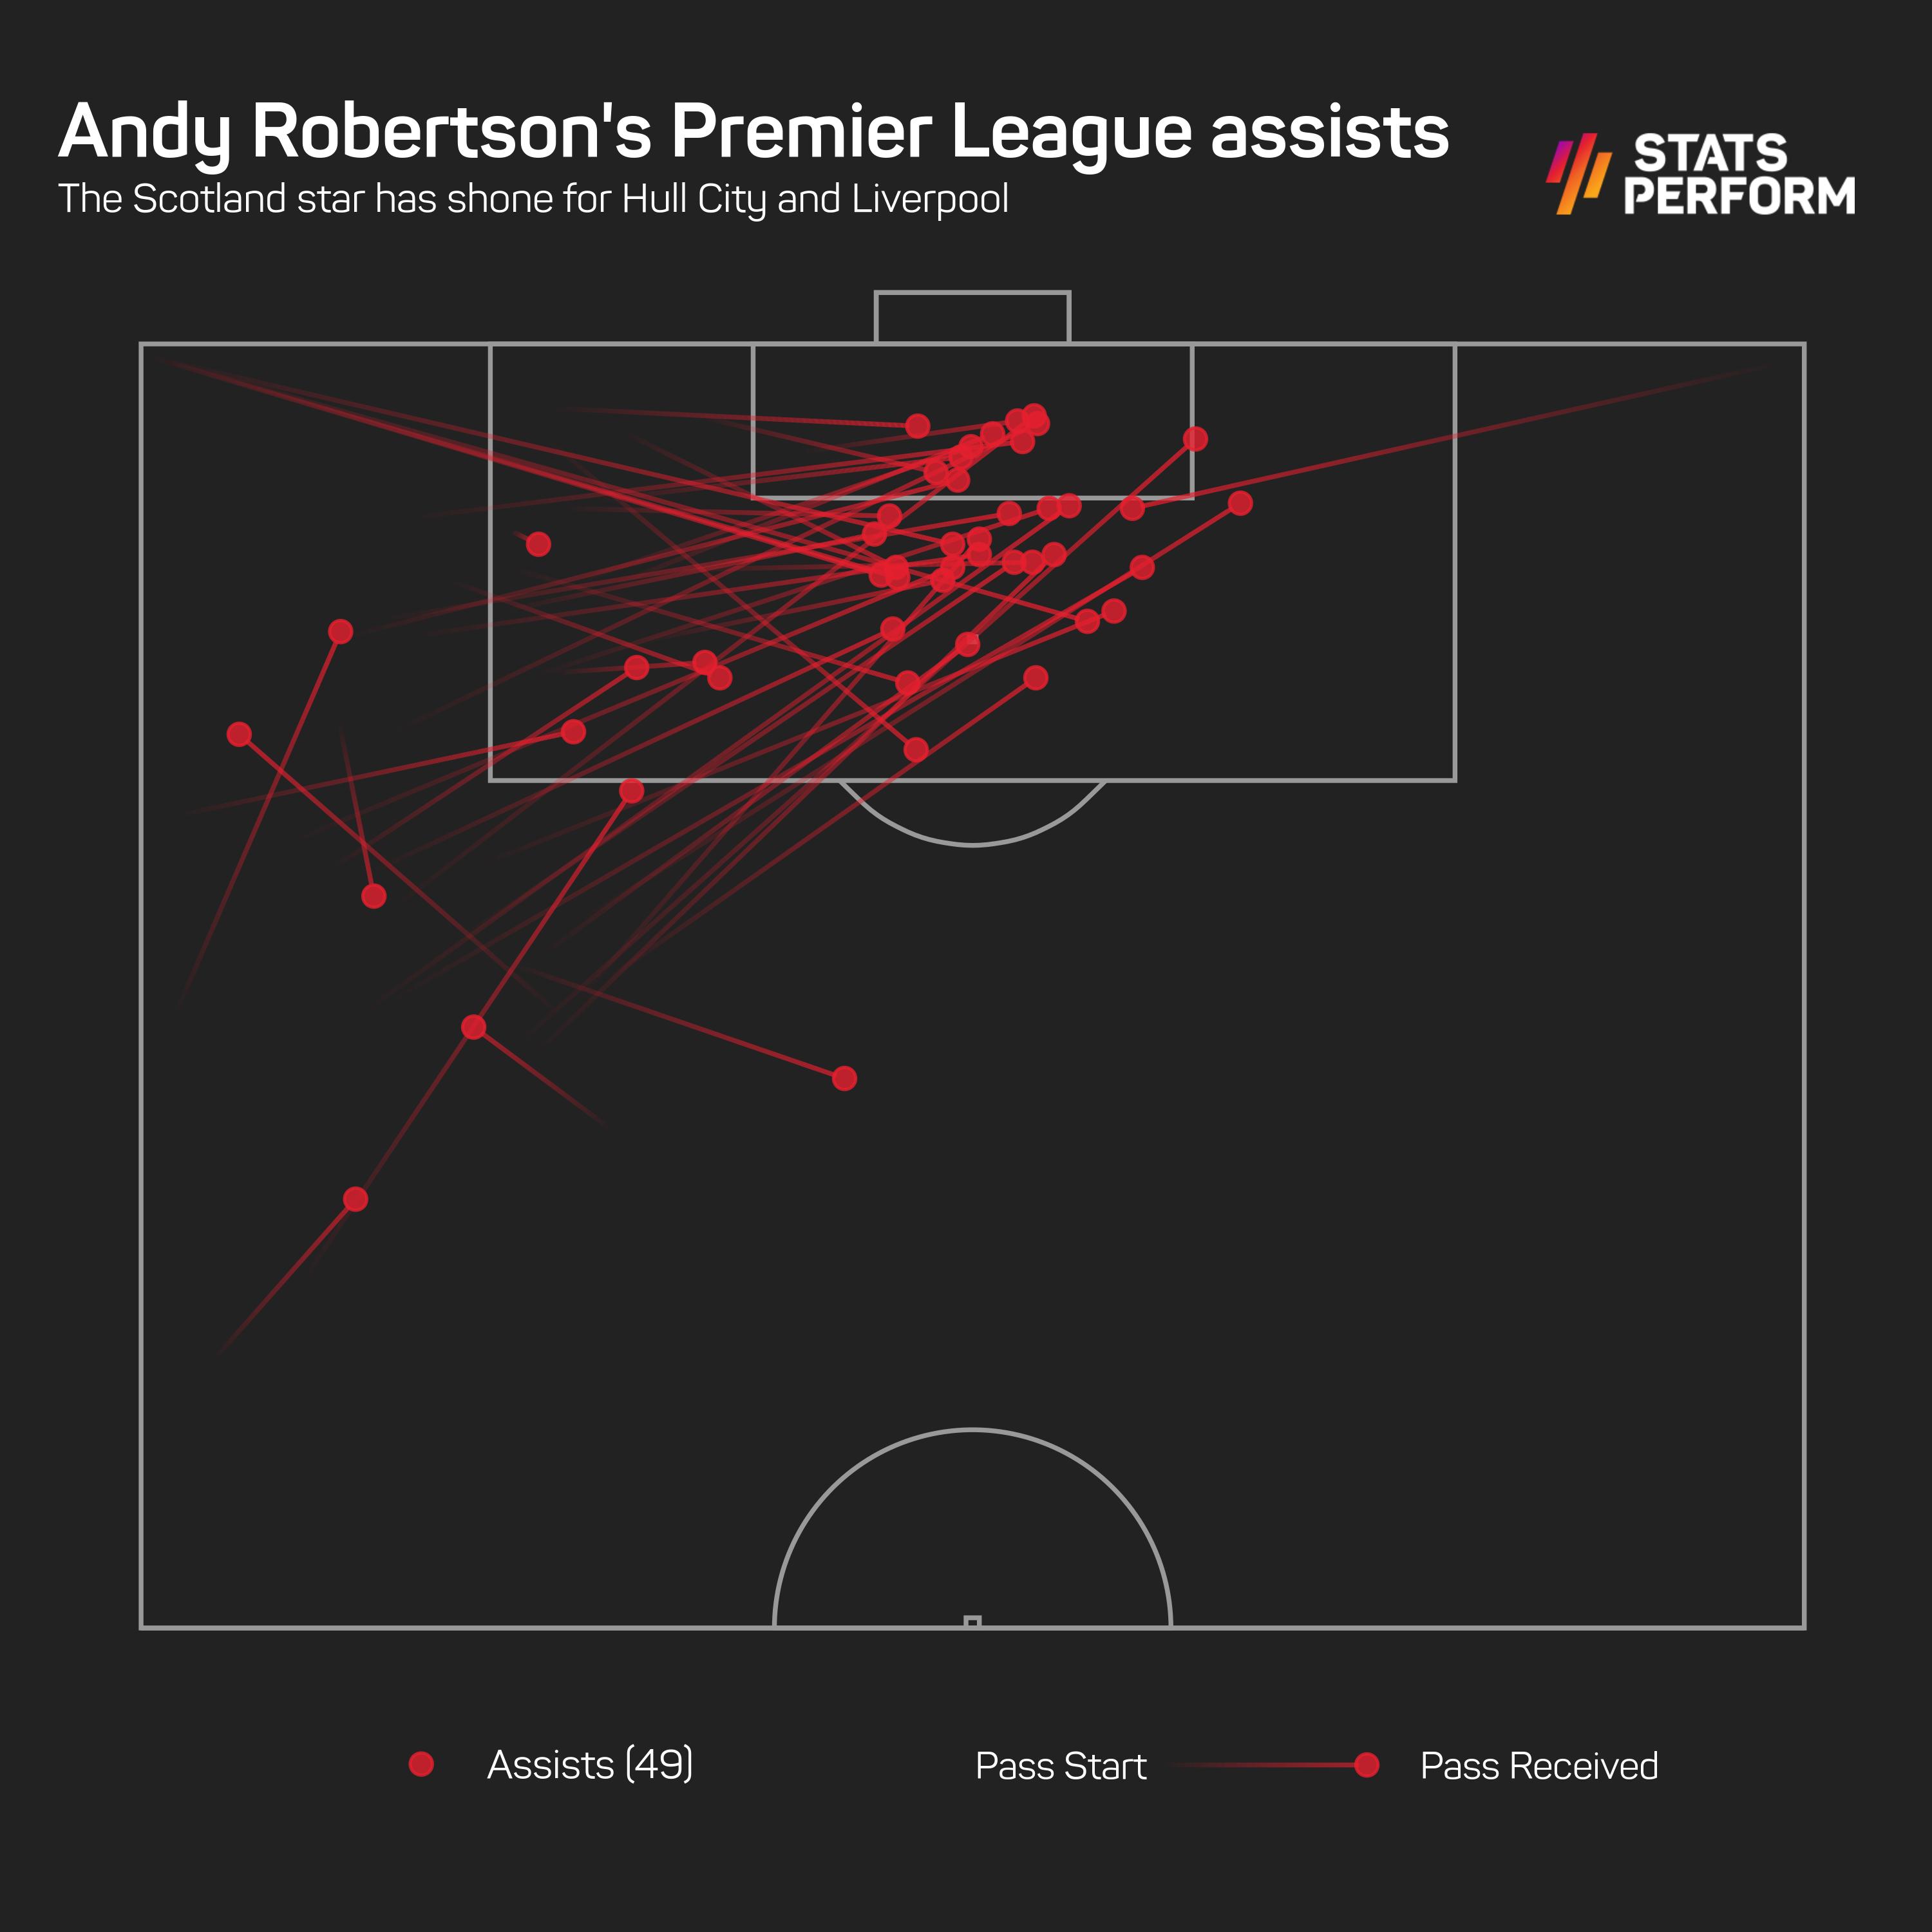 Andy Robertson assists